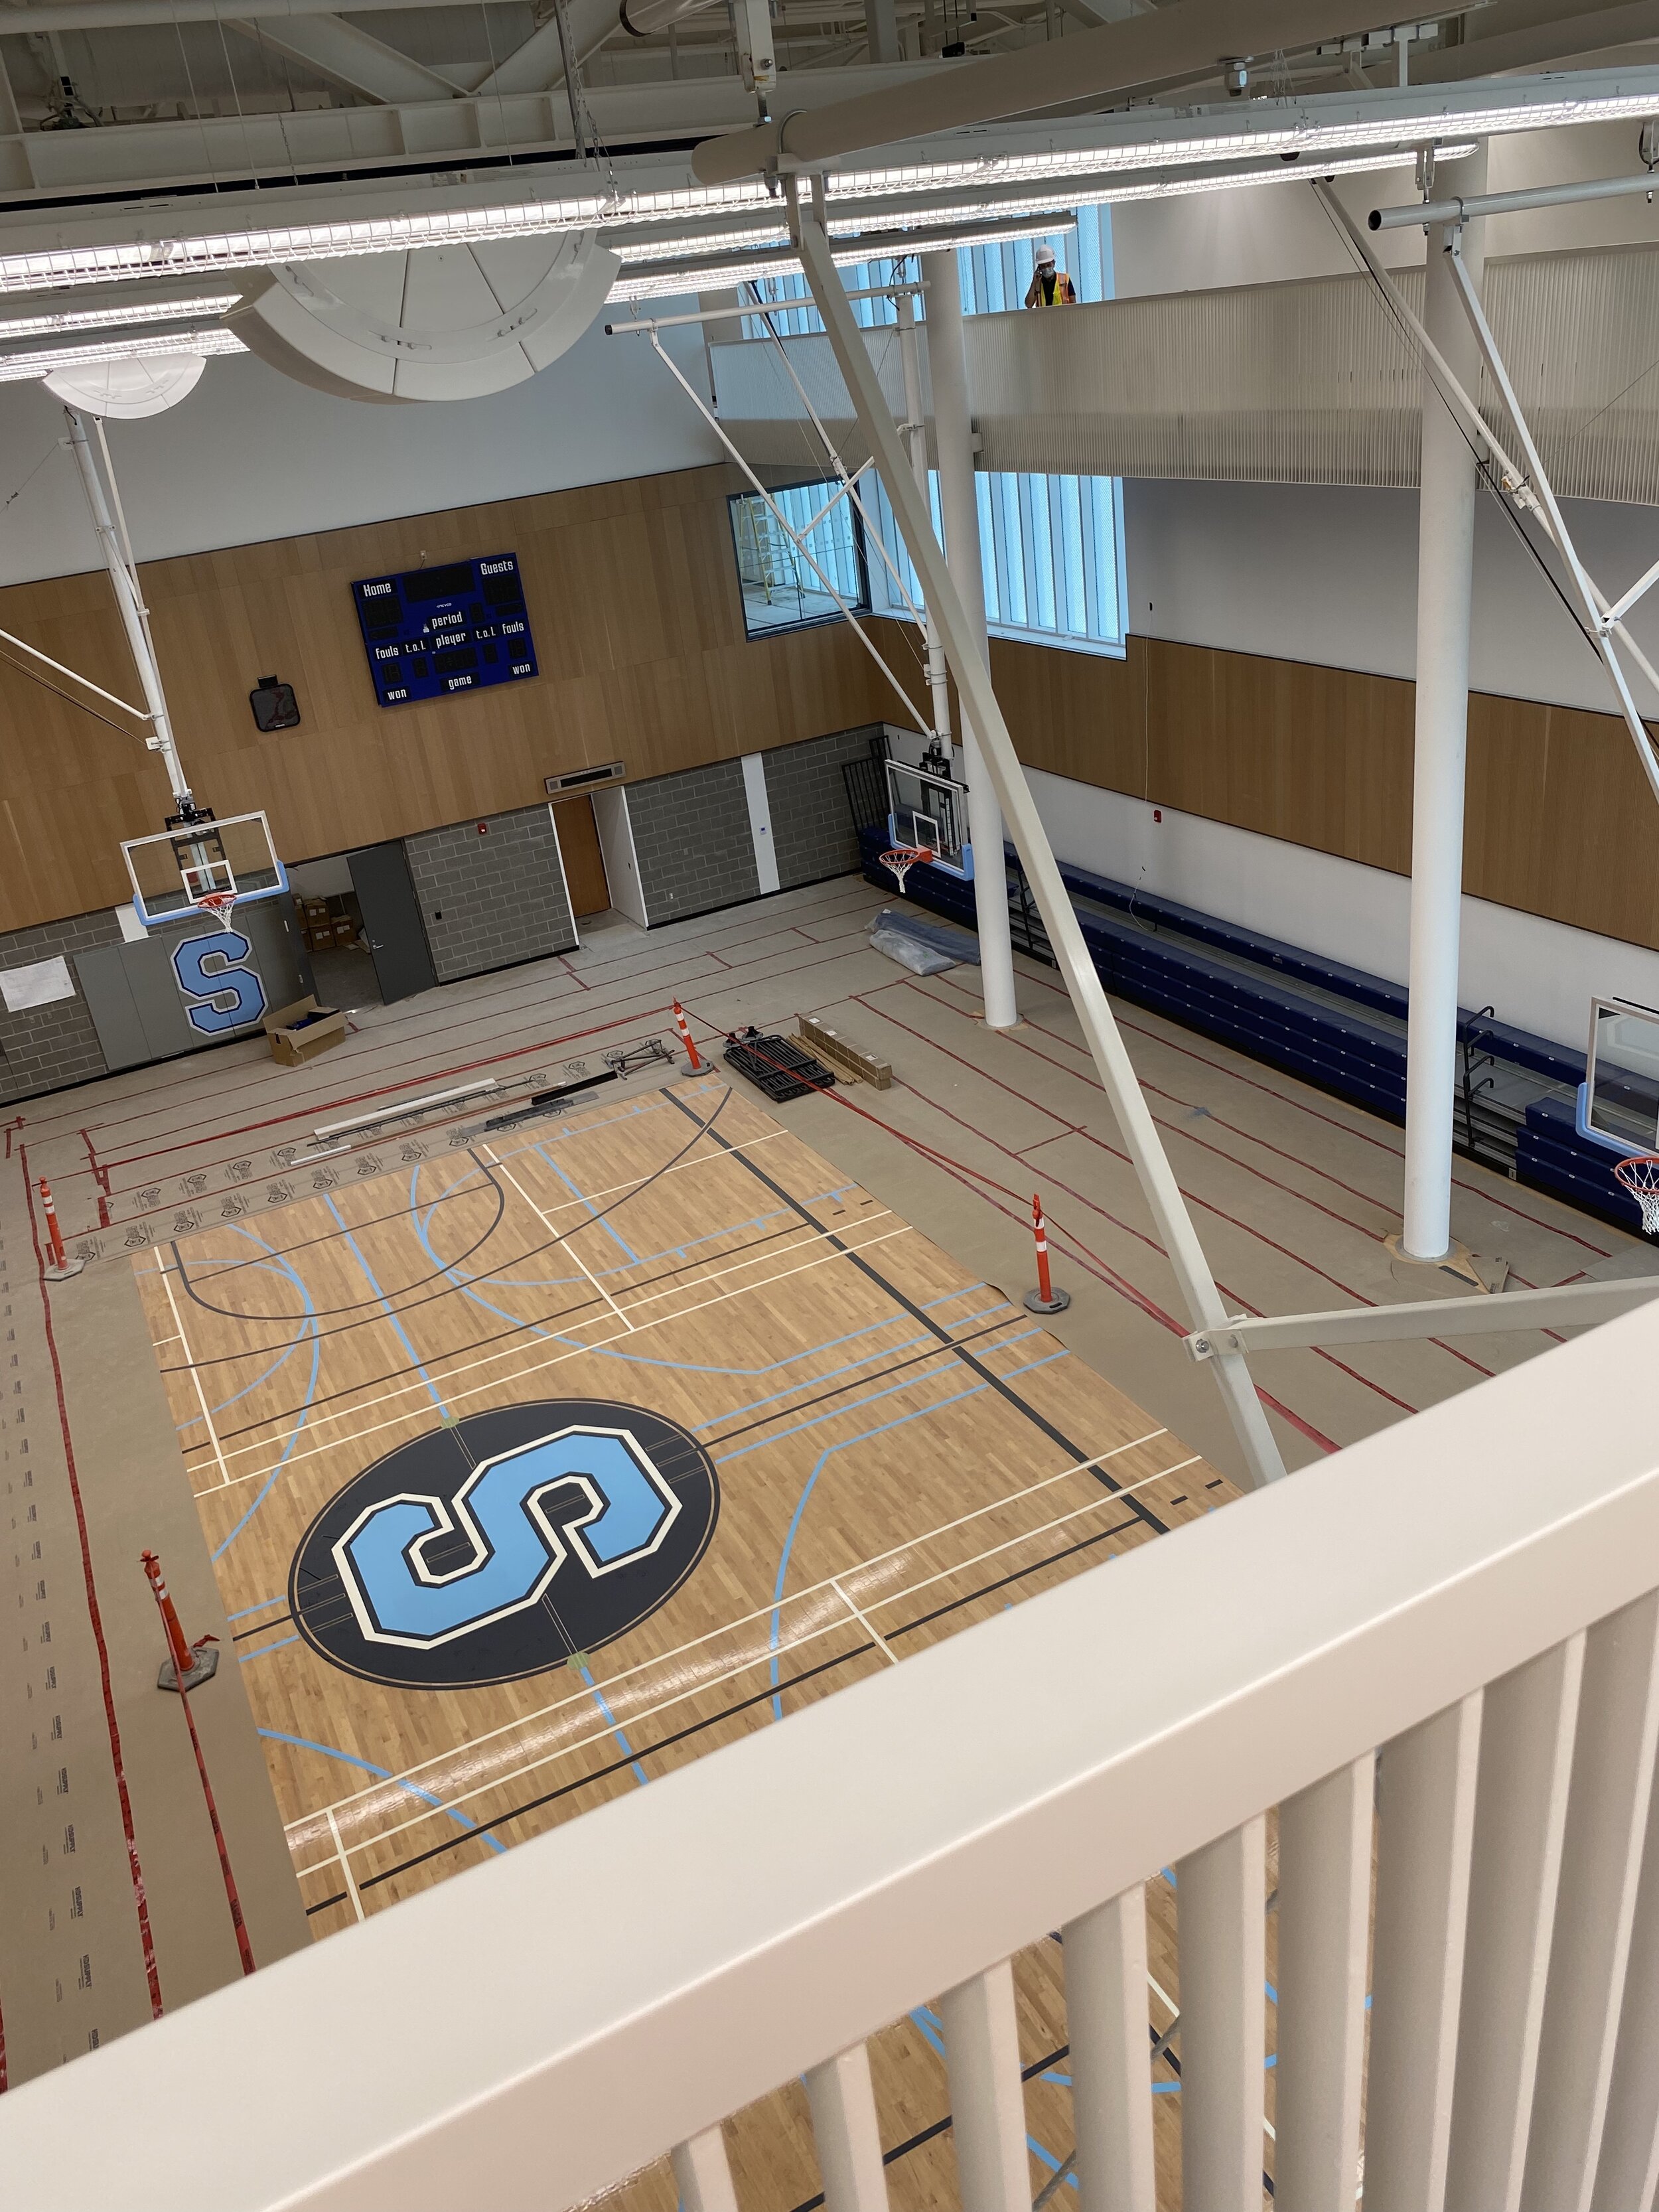  A view of Sheridan’s HMC2A basketball court from the track.  